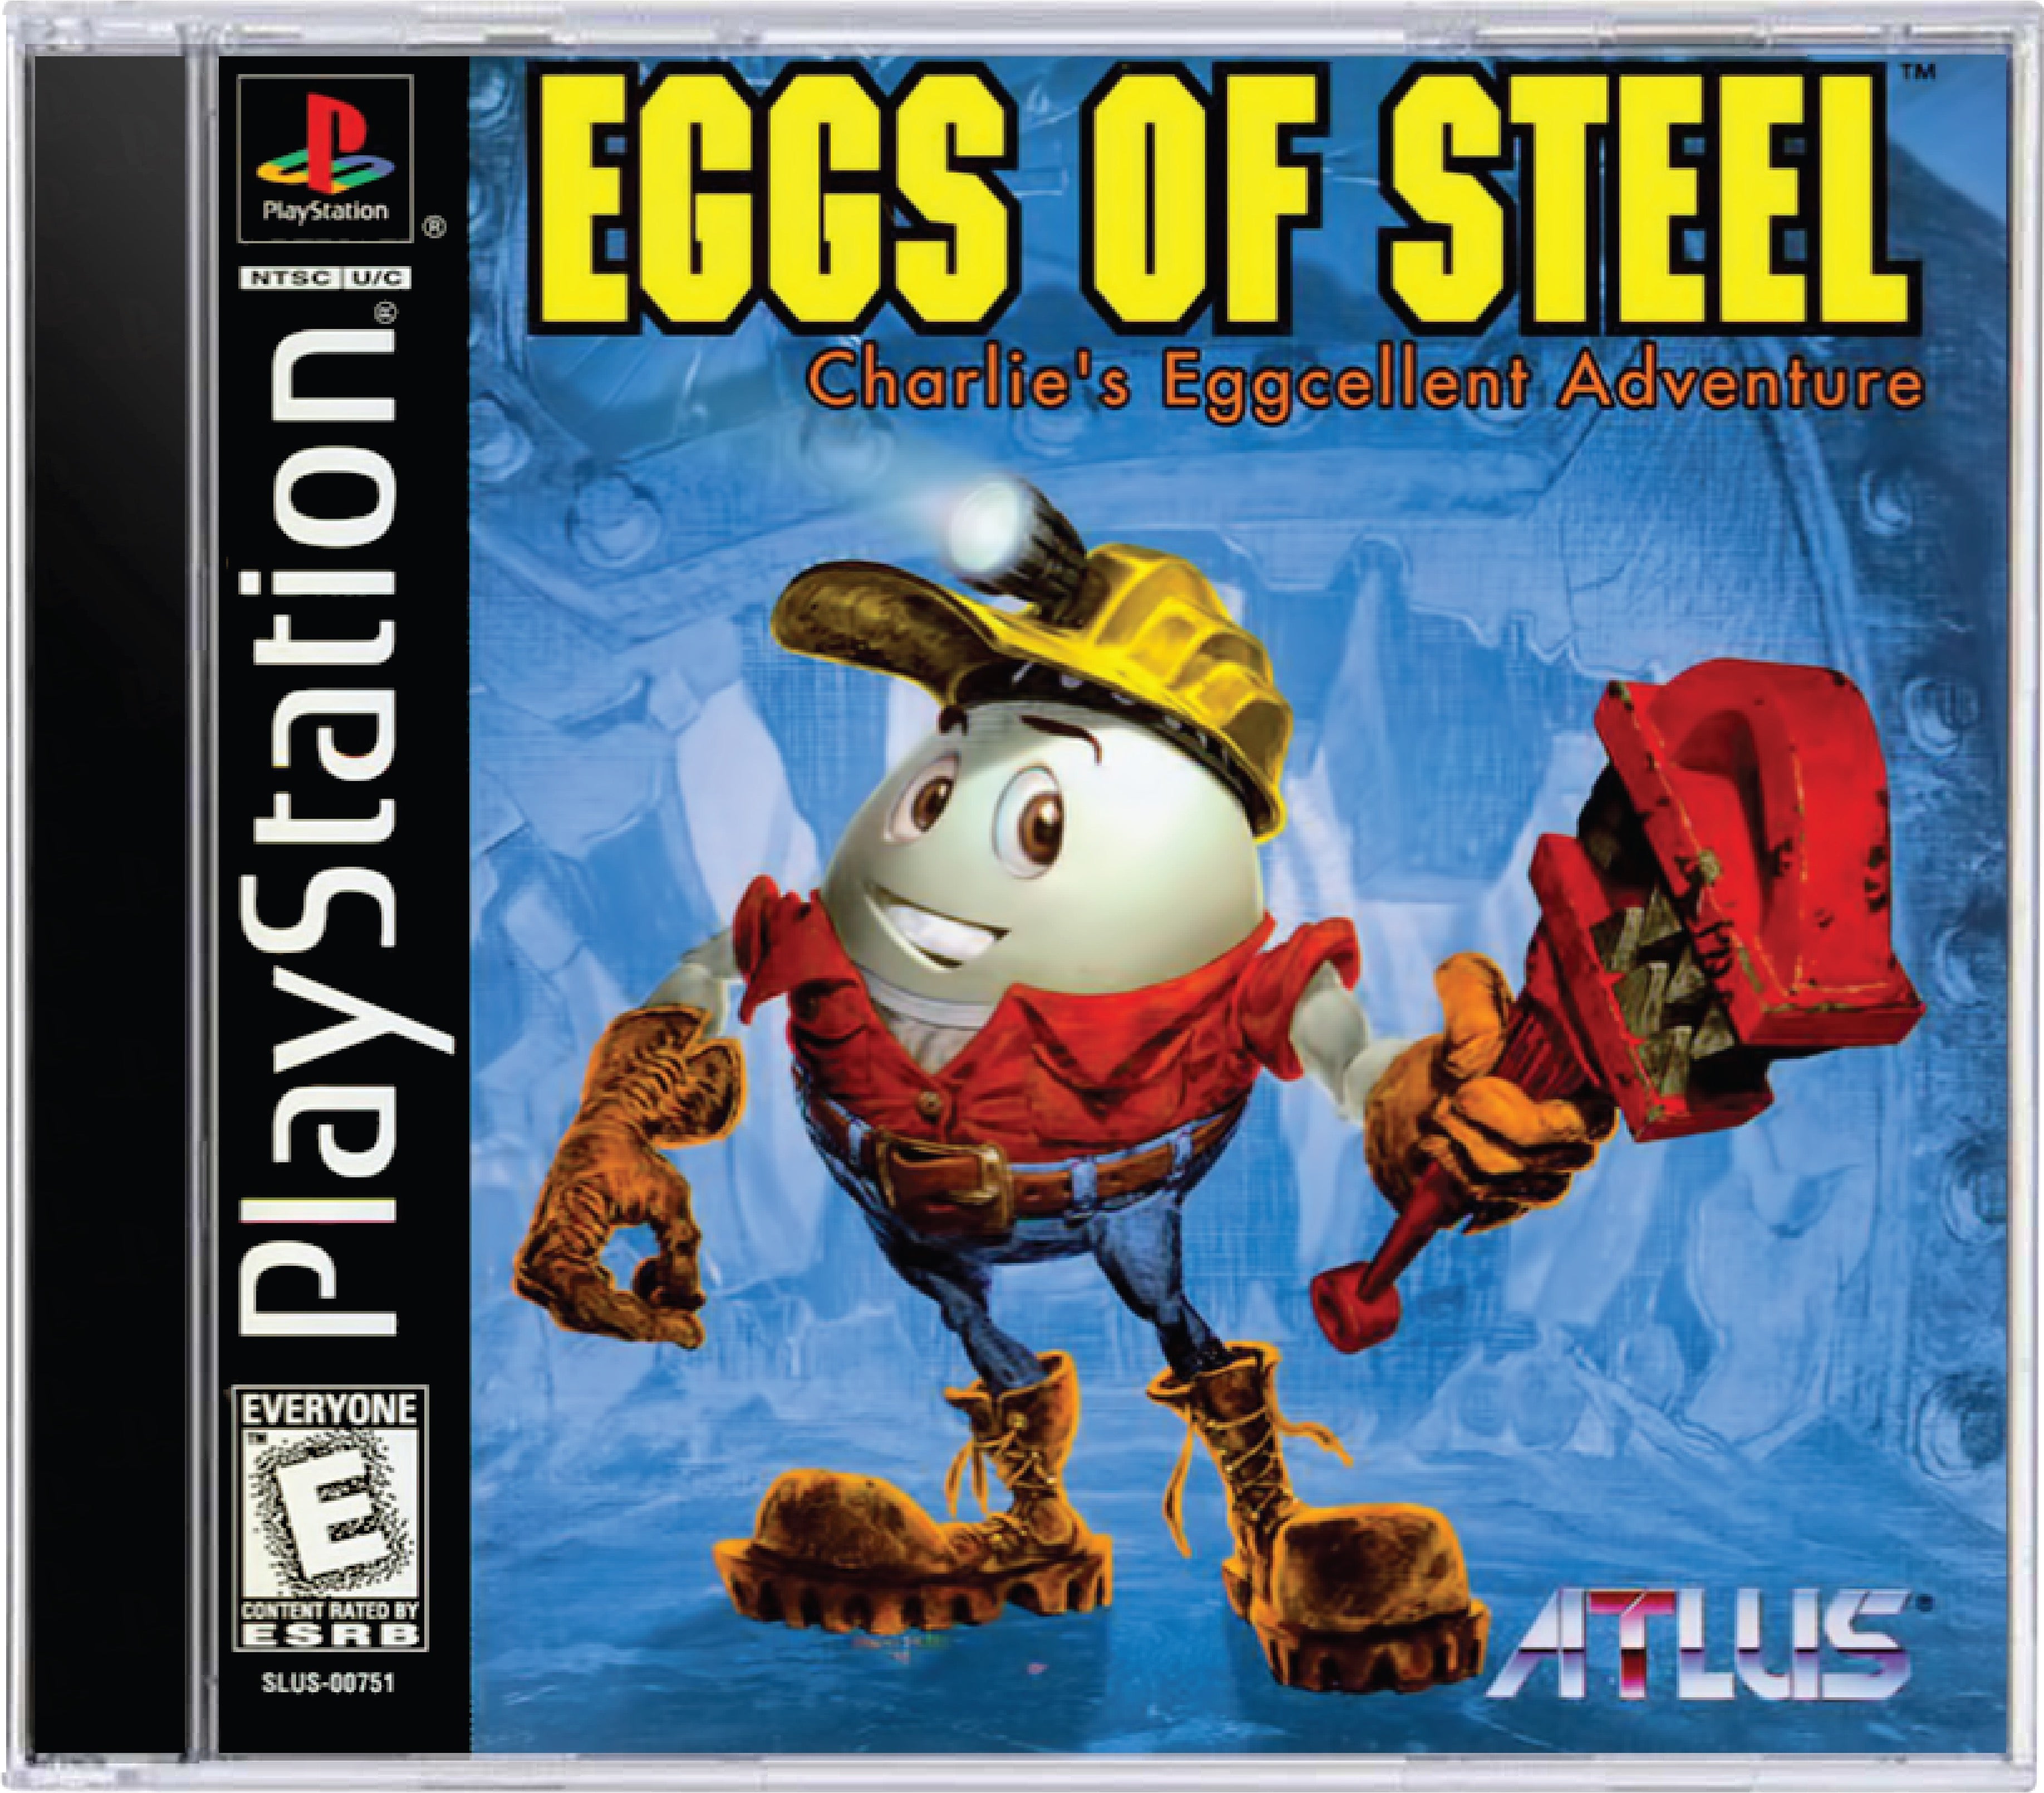 Eggs of Steel Cover Art and Product Photo